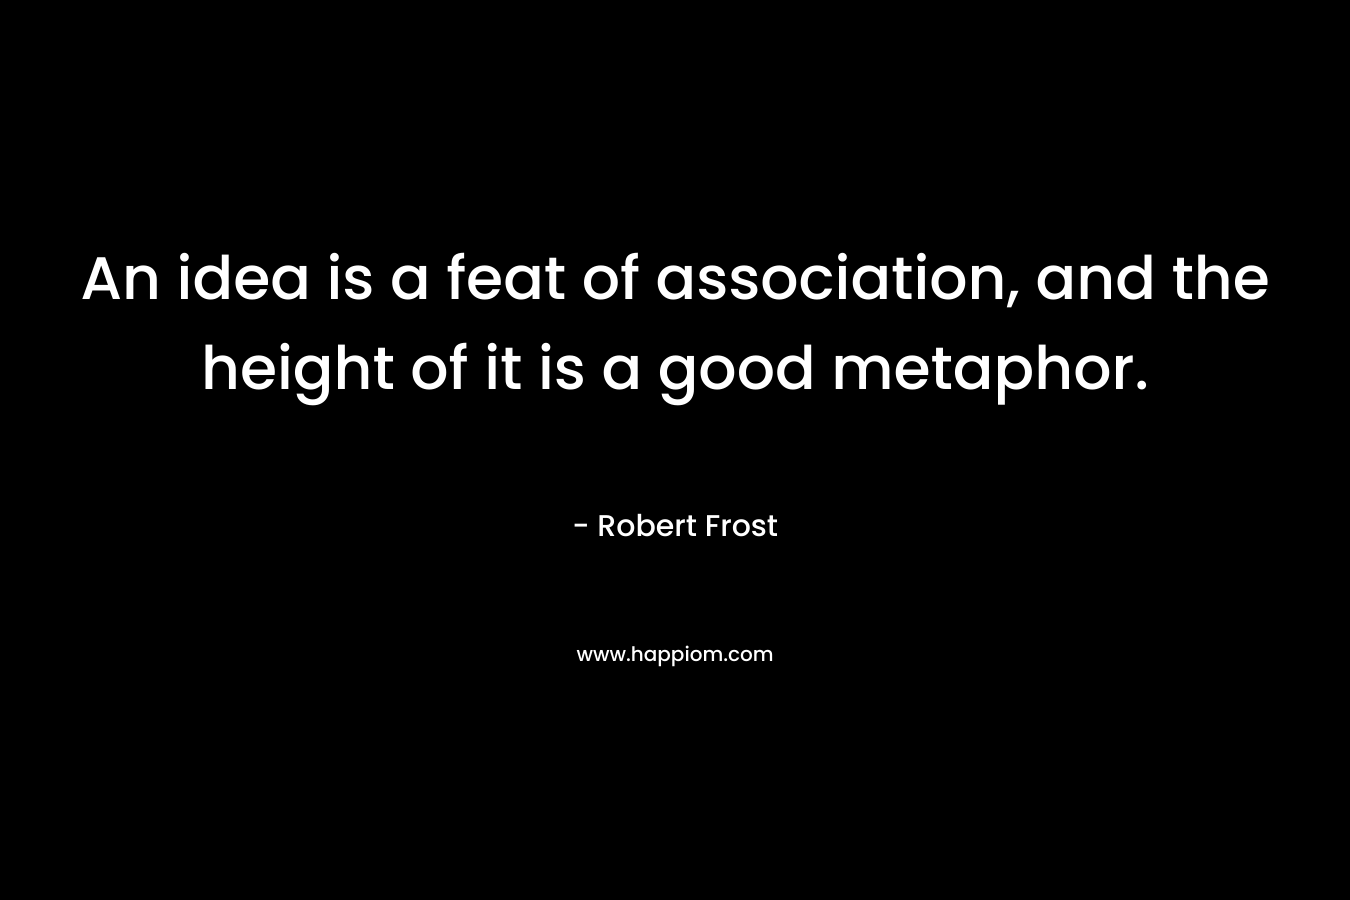 An idea is a feat of association, and the height of it is a good metaphor. – Robert Frost